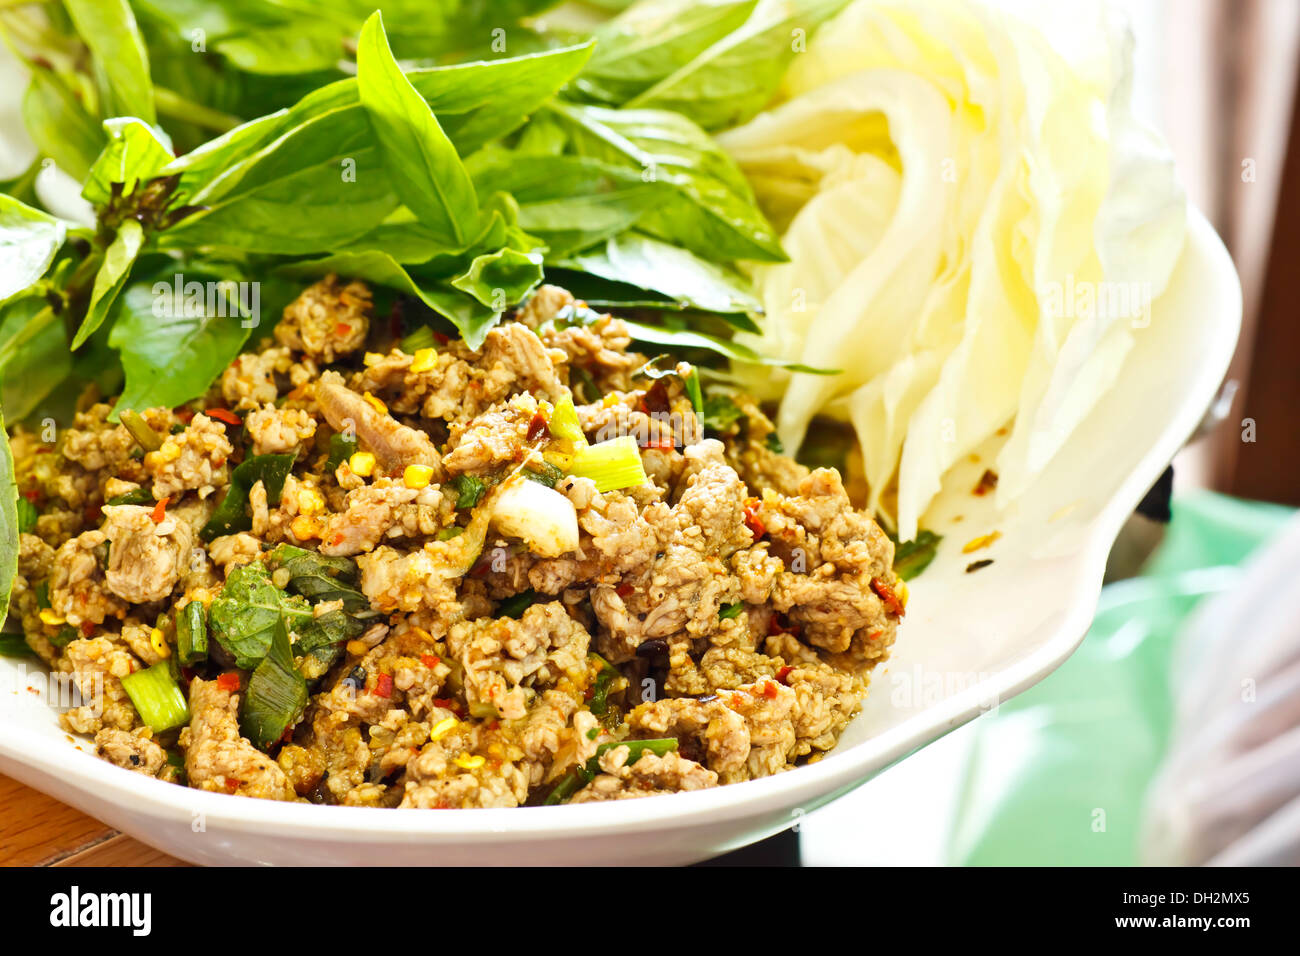 Spicy minced meat salad Stock Photo